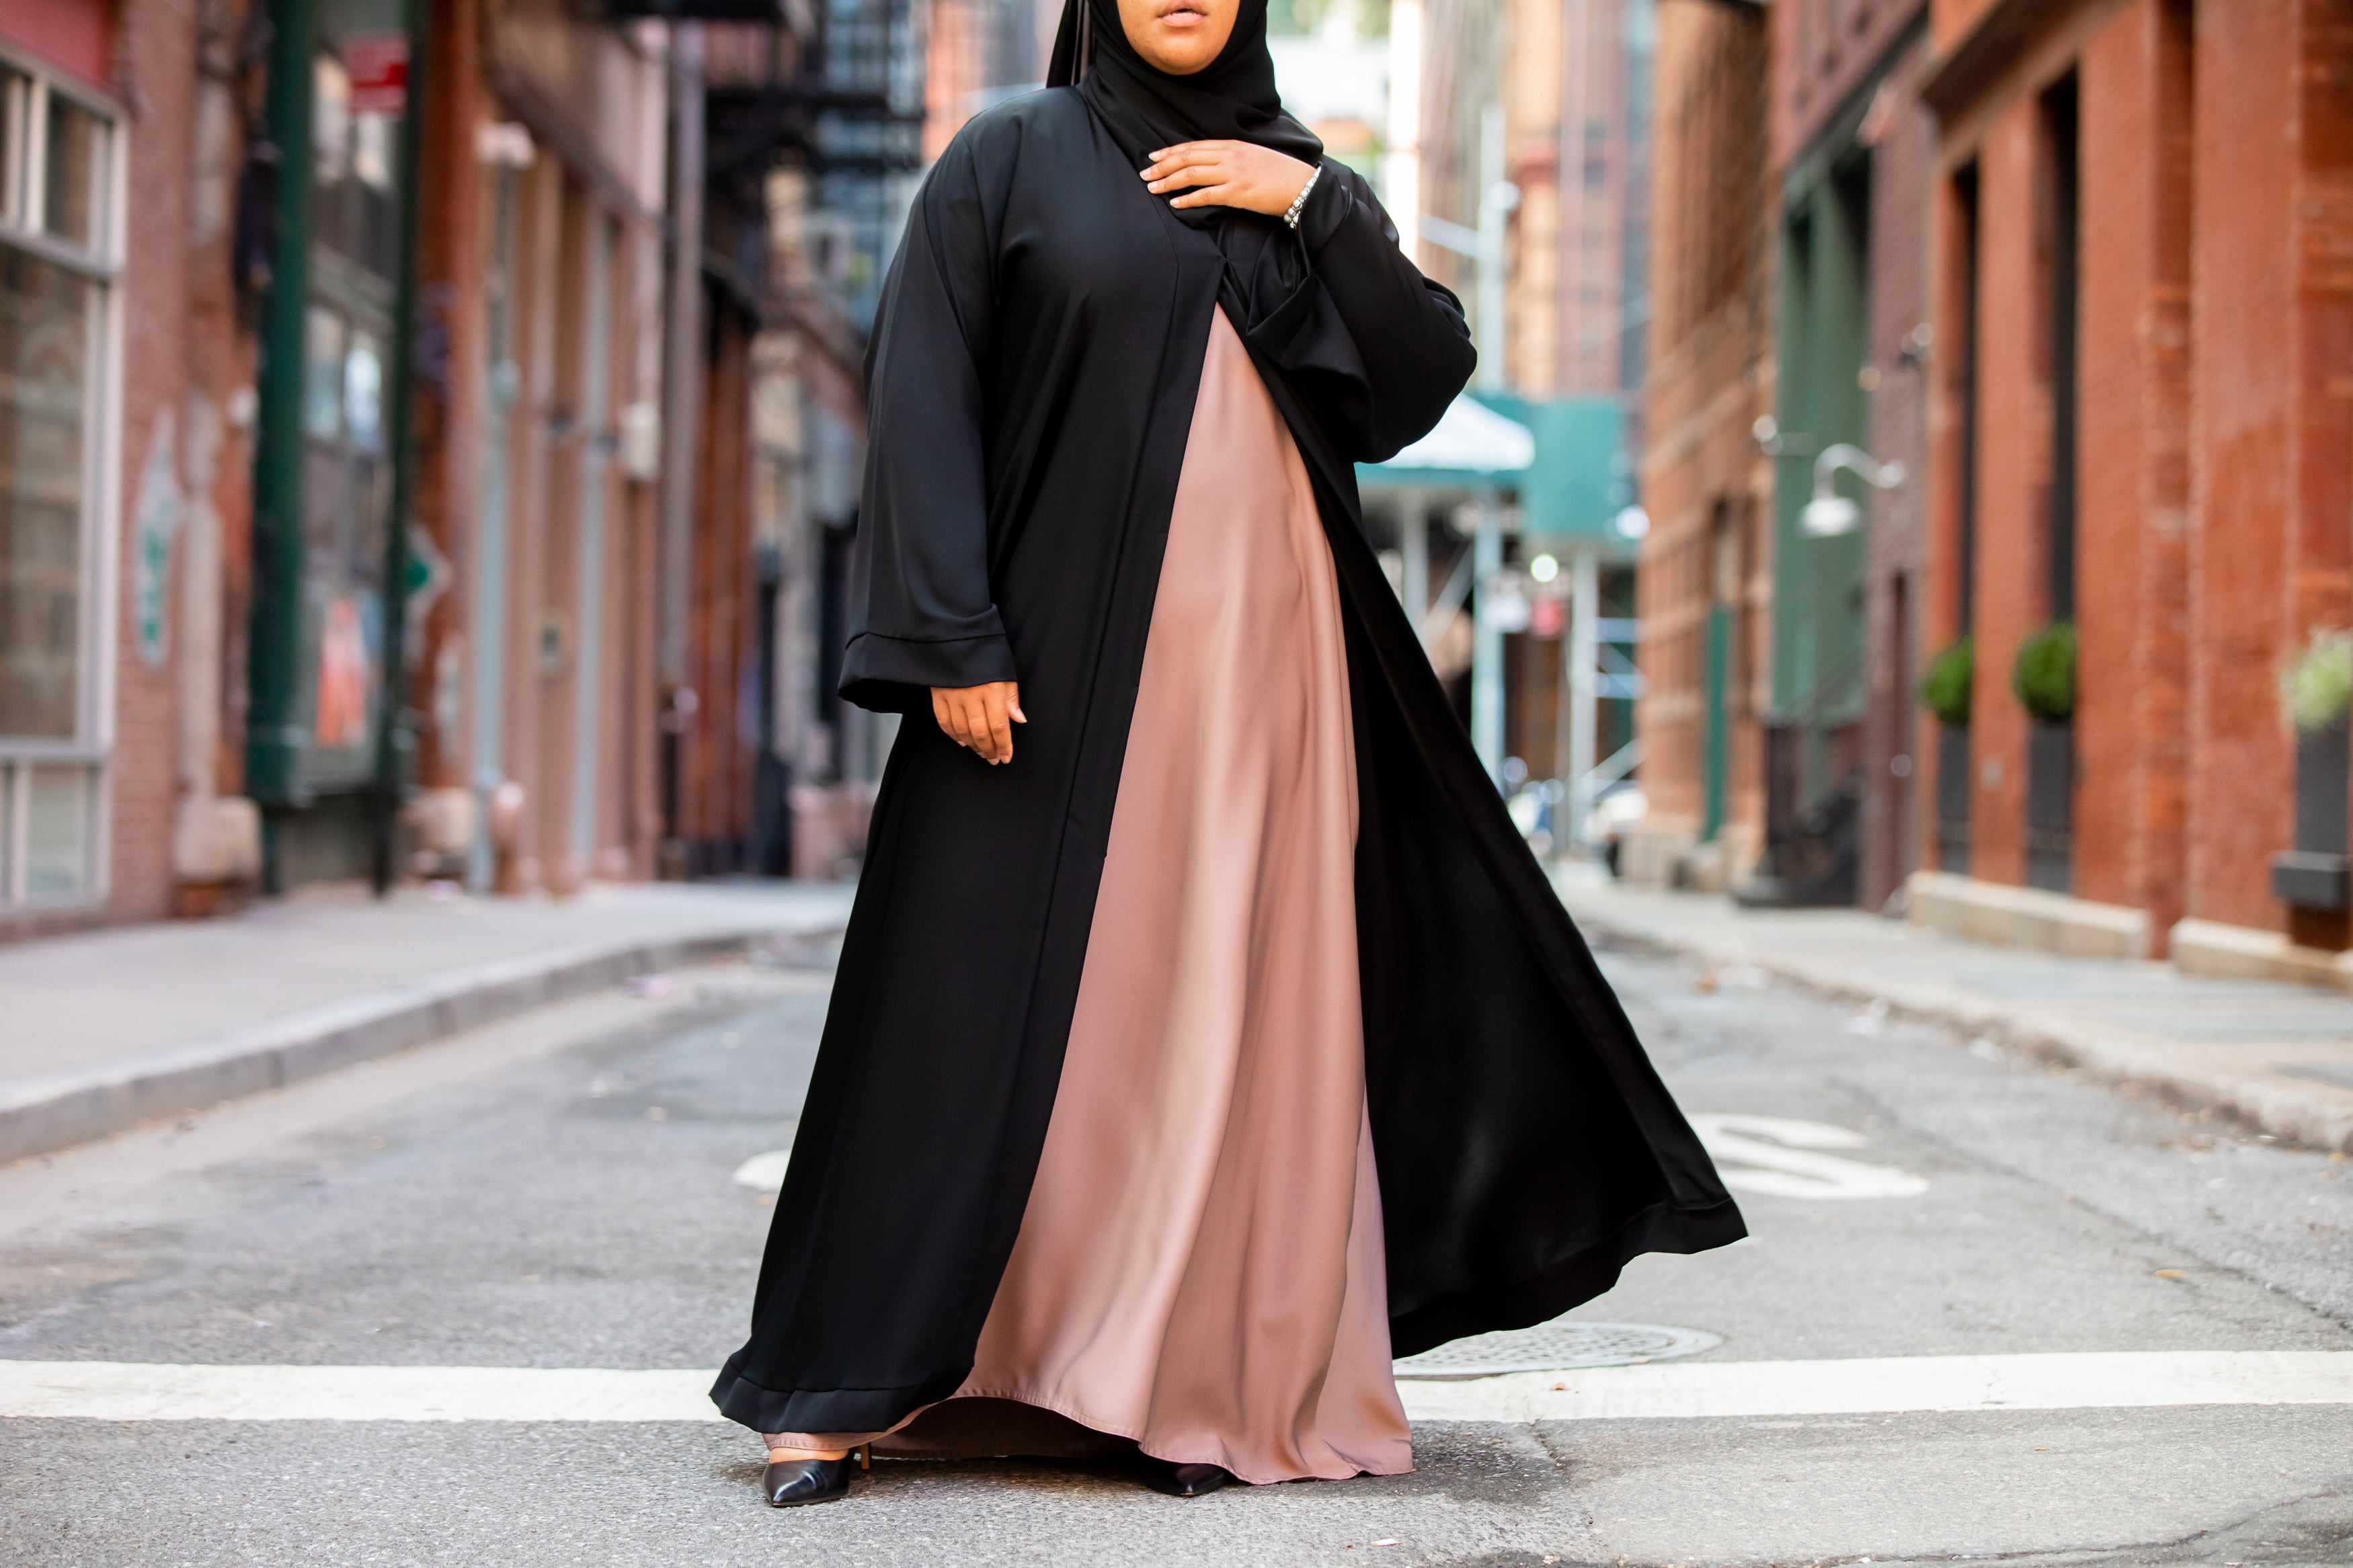 The with Plus Size Muslim Clothing – Al Abayas